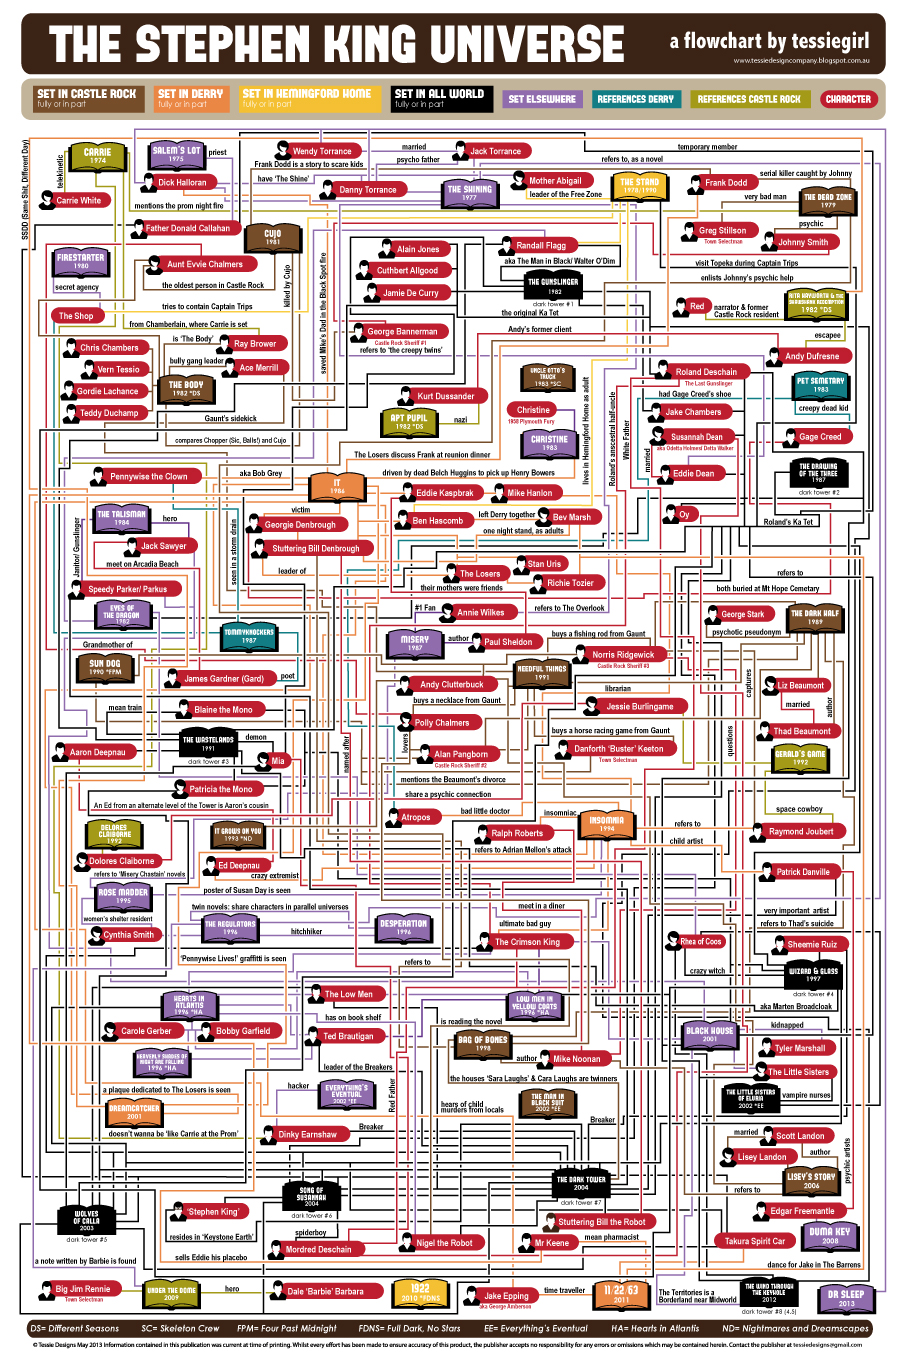 Stephen King's Universe, Available at http://www.coolinfographics.com/blog/2013/5/16/the-stephen-king-universe.html